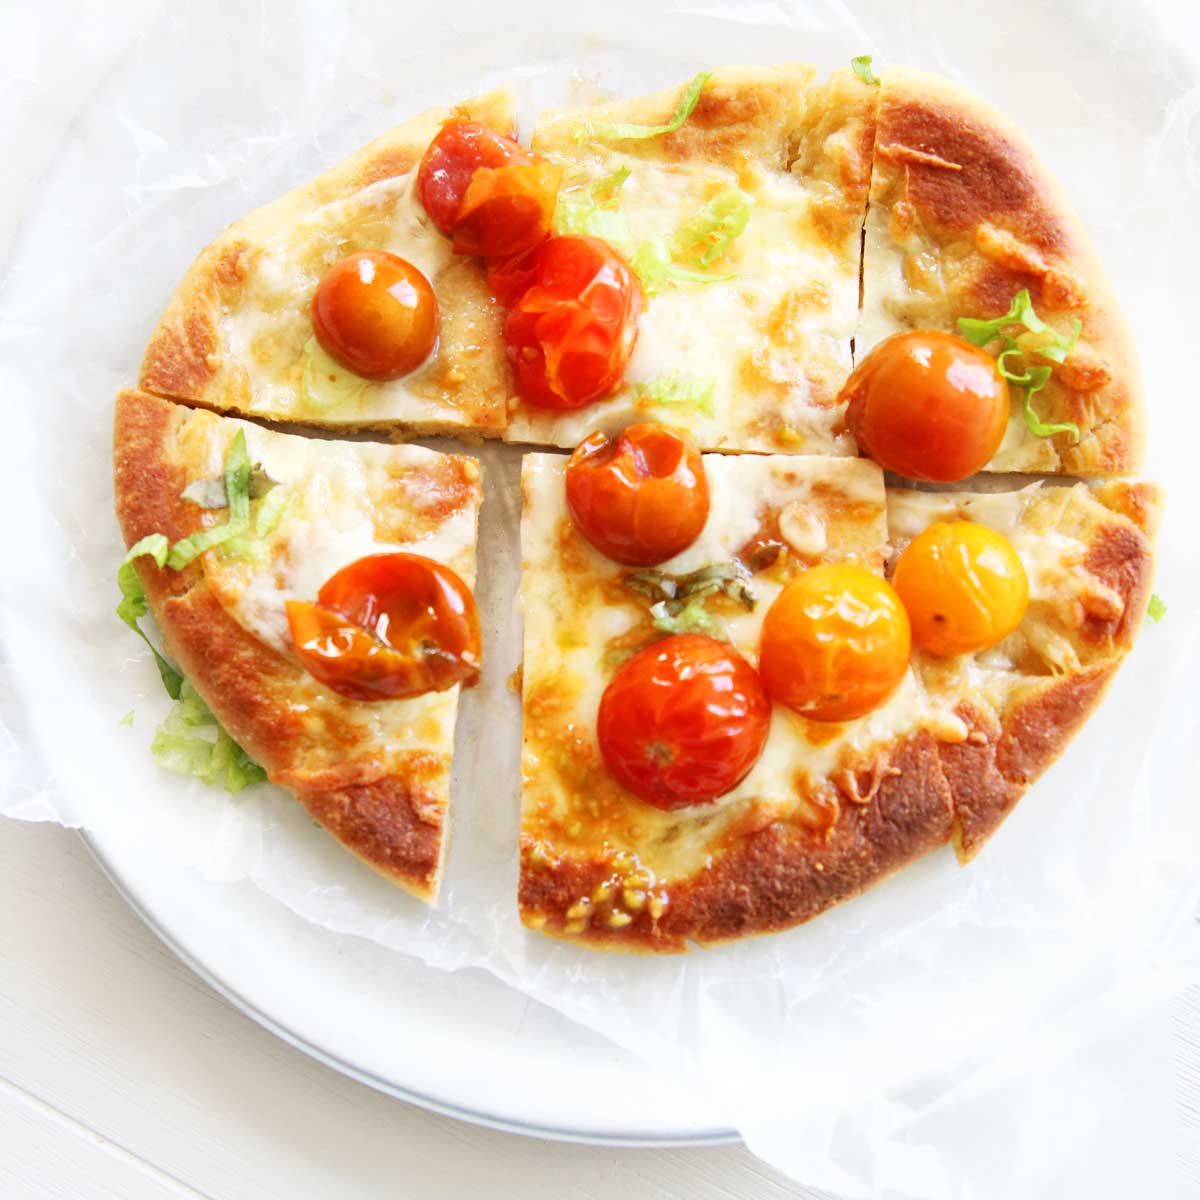 vegan flatbread topping ideas and flatbread pizza recipes - cherry tomatoes